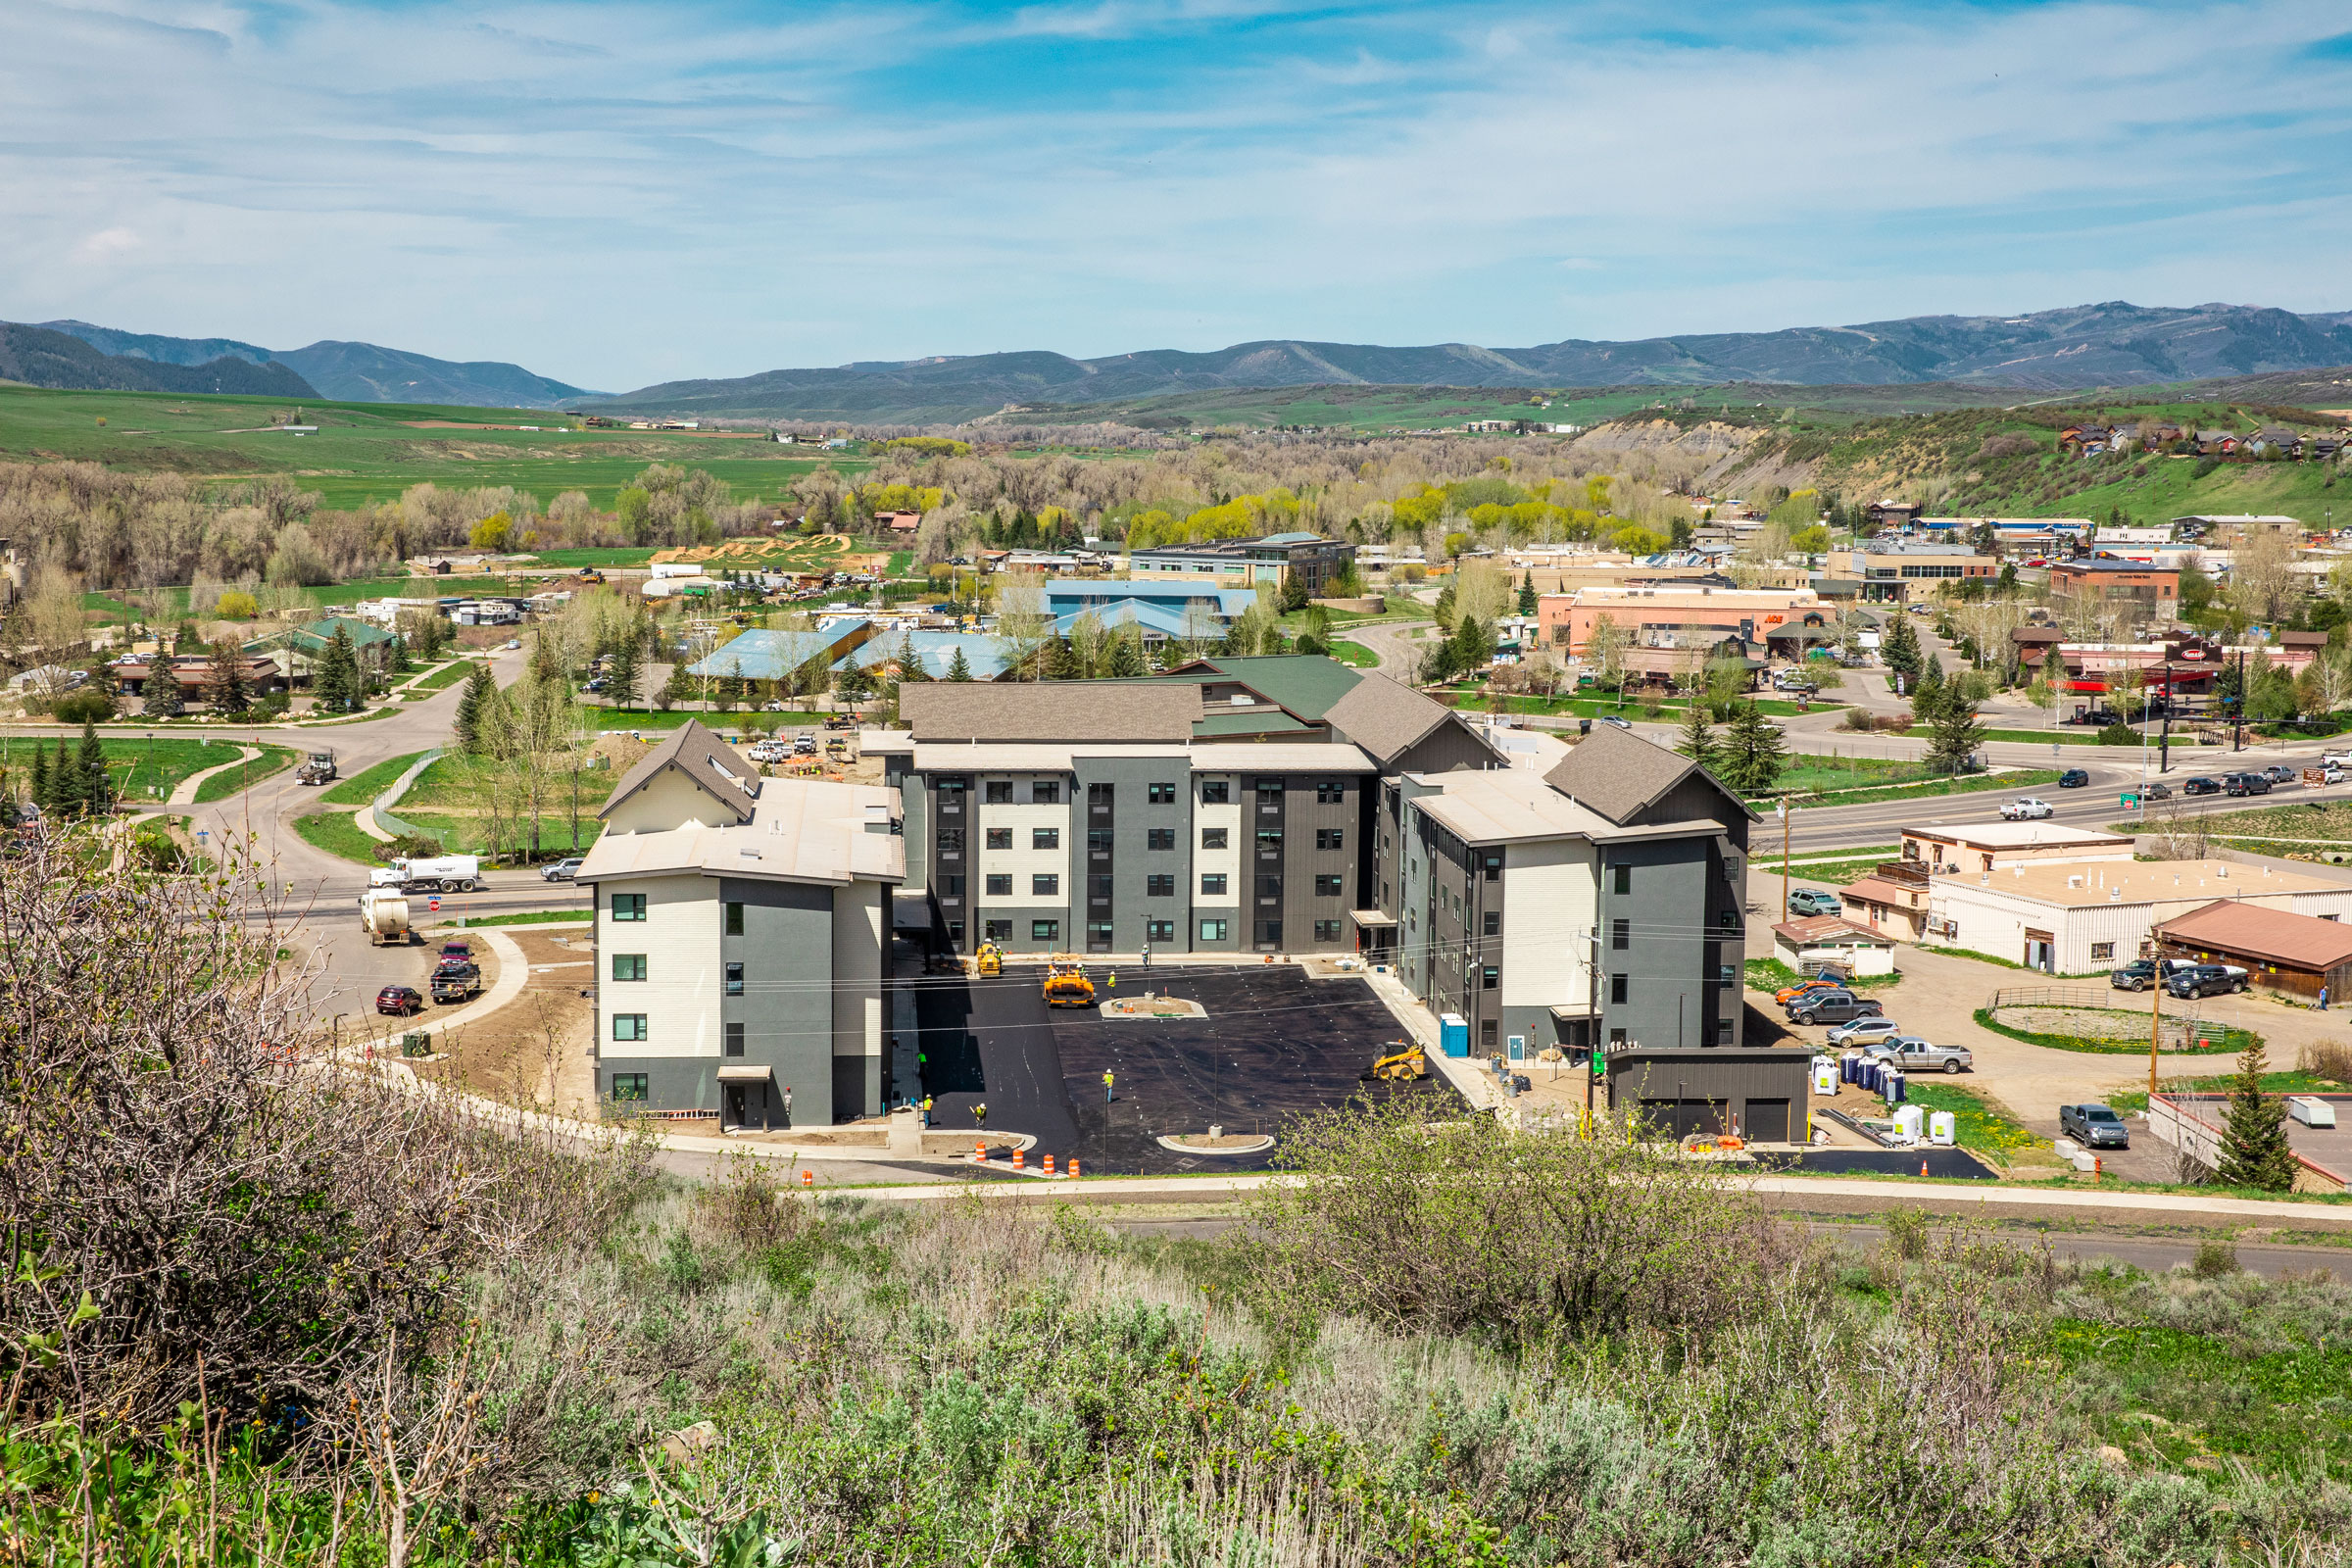 Sunlight Crossing, a 90-unit apartment complex on the west end of Steamboat Springs, Colorado, built by the Yampa Valley Housing Authority and Gorman & Company and Deneuve Construction. (David Williams for TIME)